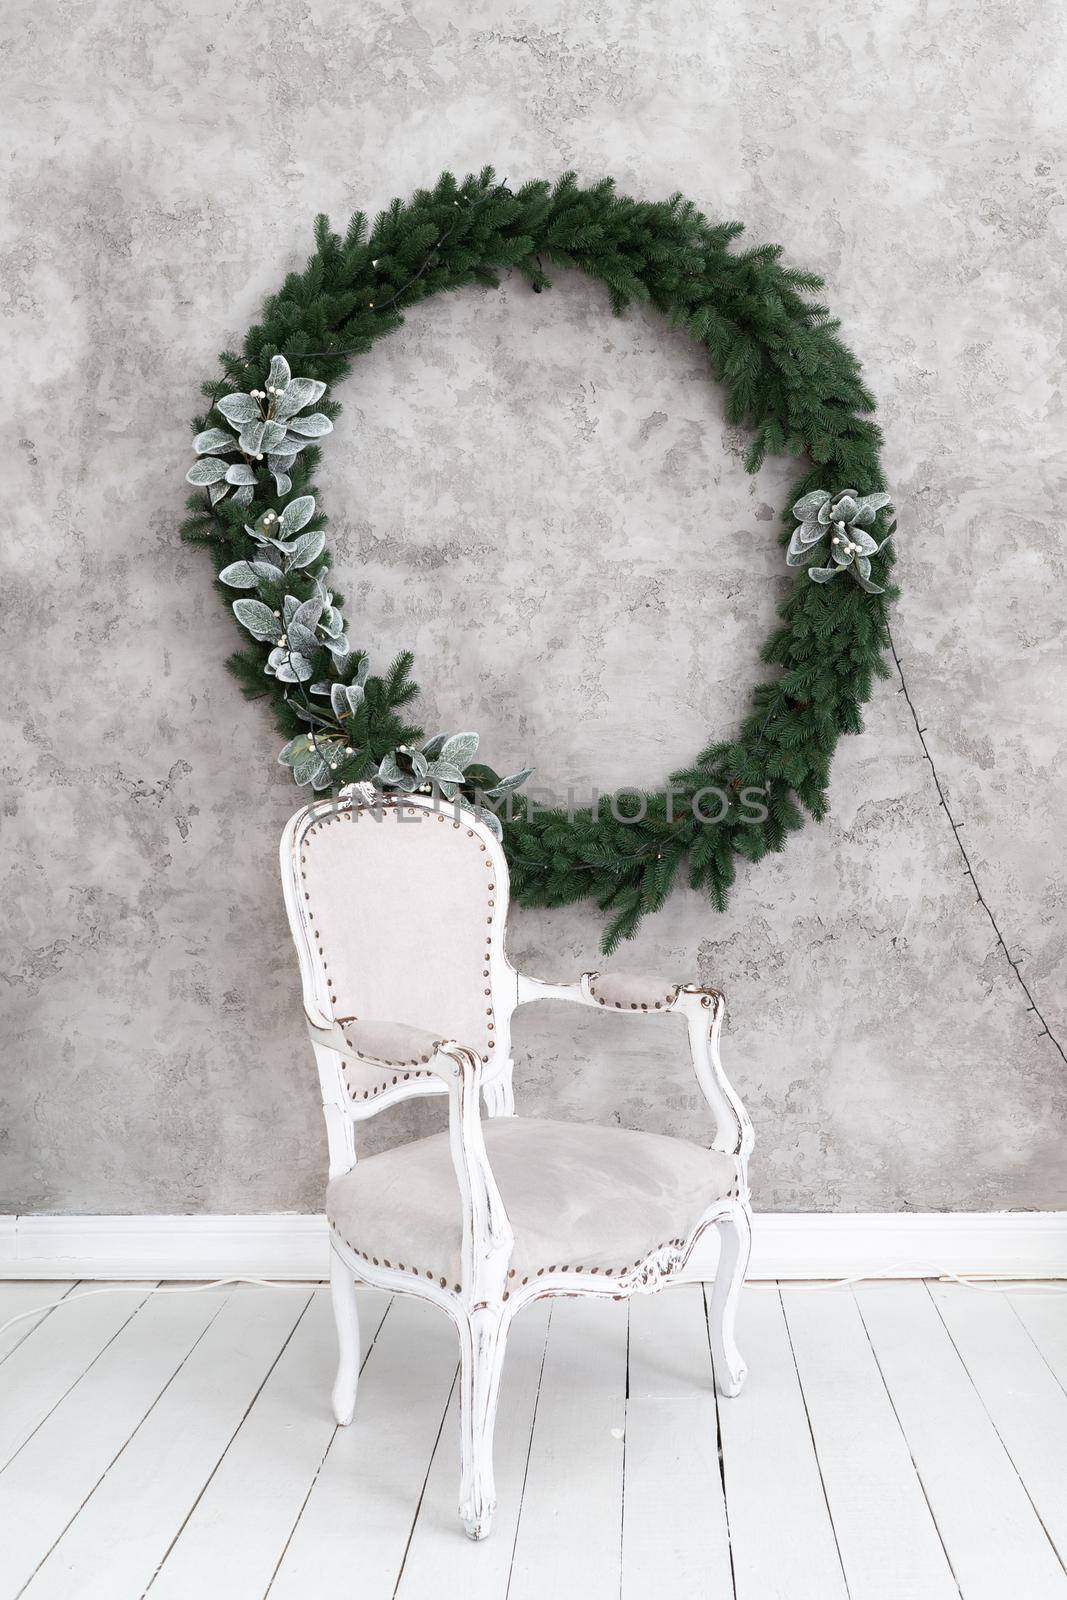 Christmas interior of the room. Gray chair stands under a light wall on which hangs a Christmas wreath. Green conifer wreath decorated with silver leaves and garland. High quality photo.